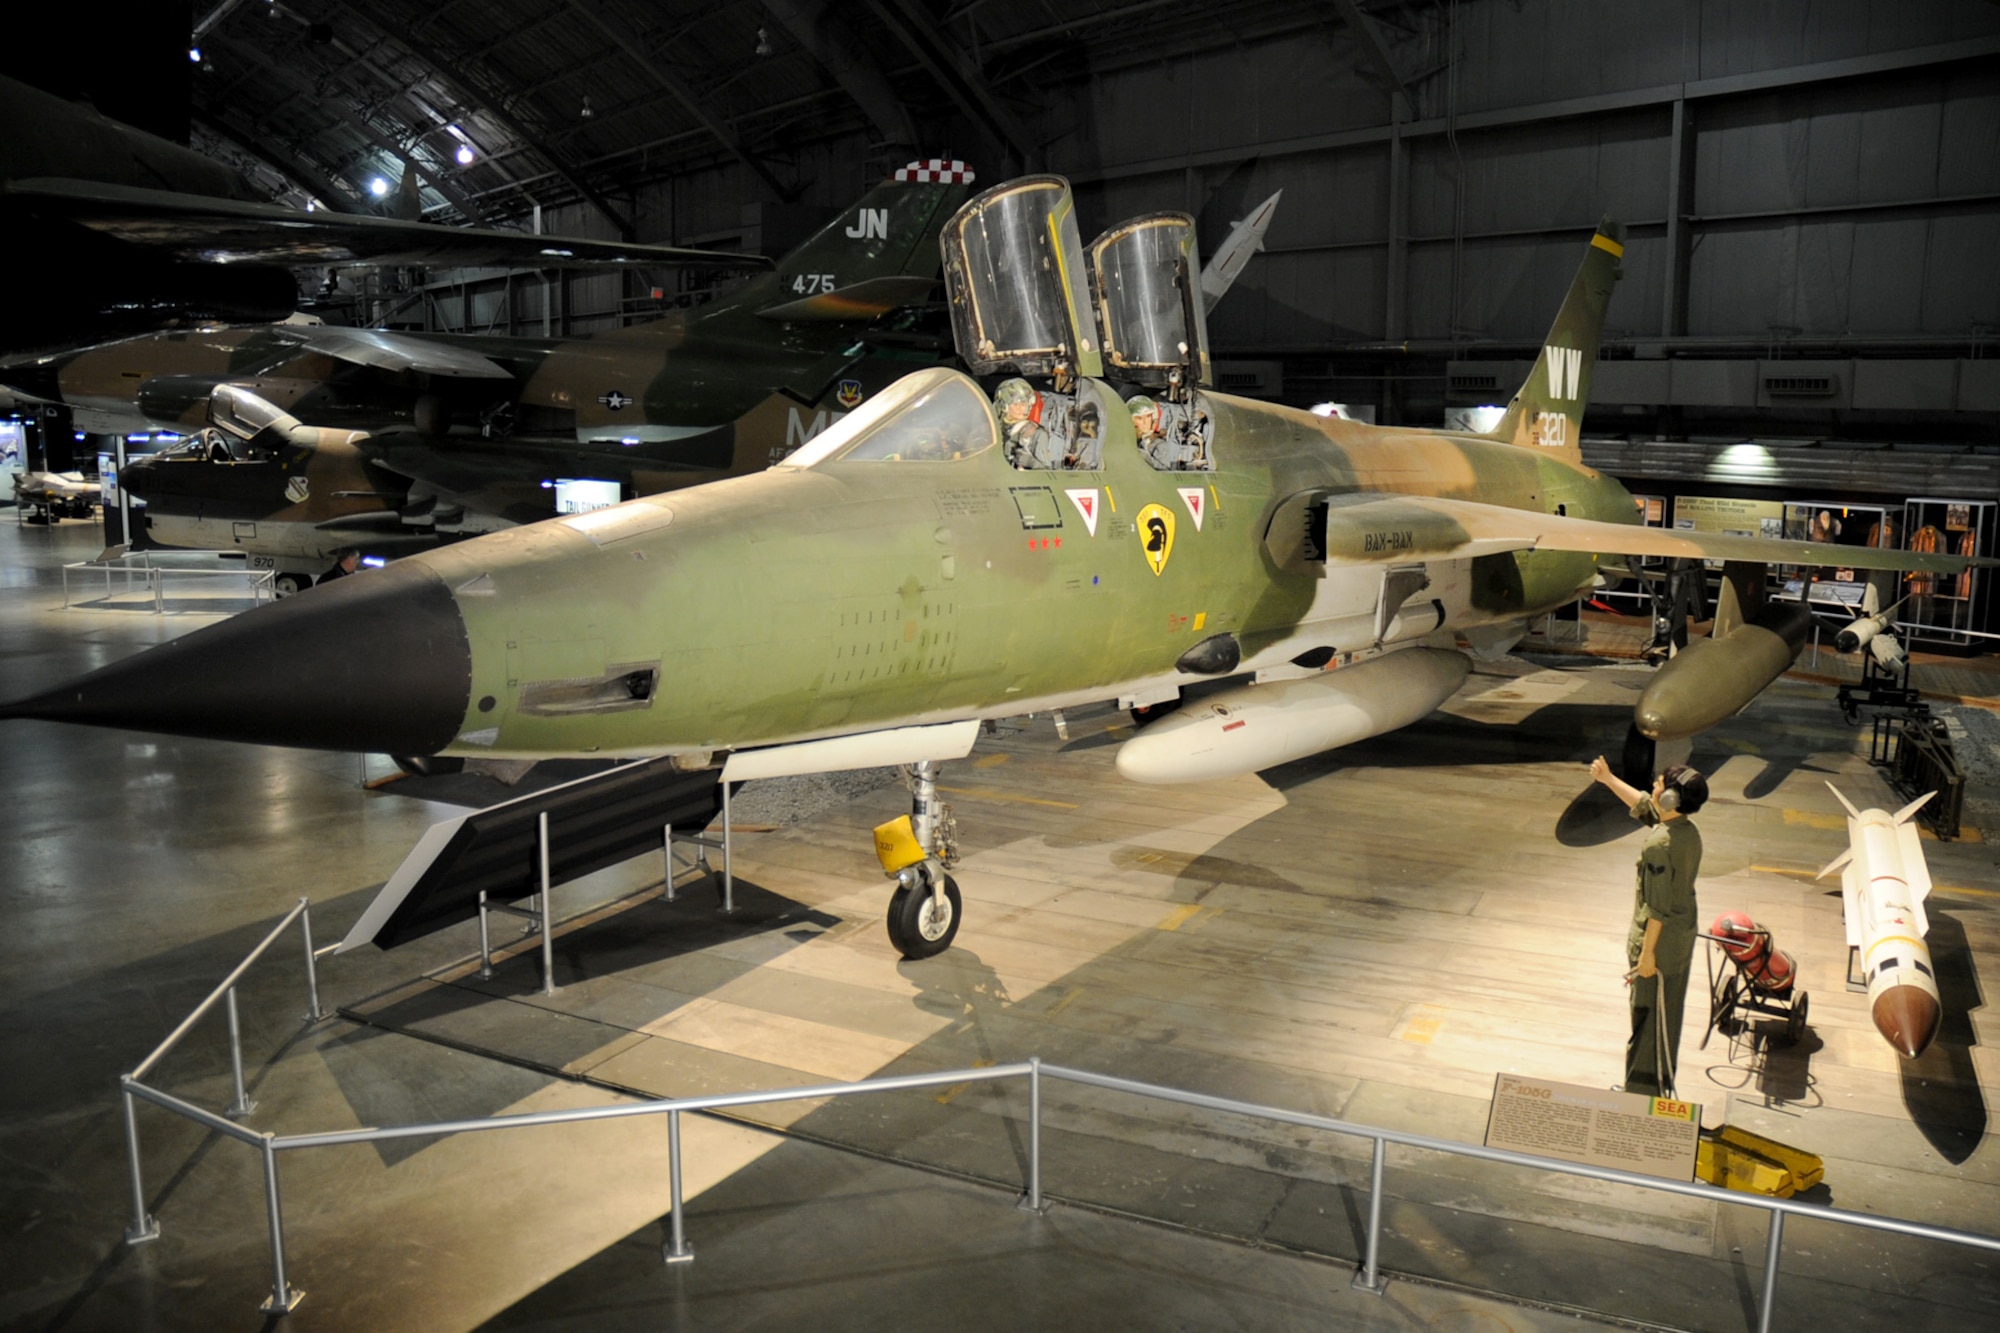 DAYTON, Ohio - Wild Weasel exhibit, including the Republic F-105G, in the Southeast Asia War Gallery at the National Museum of the United States Air Force. (U.S. Air Force photo)
